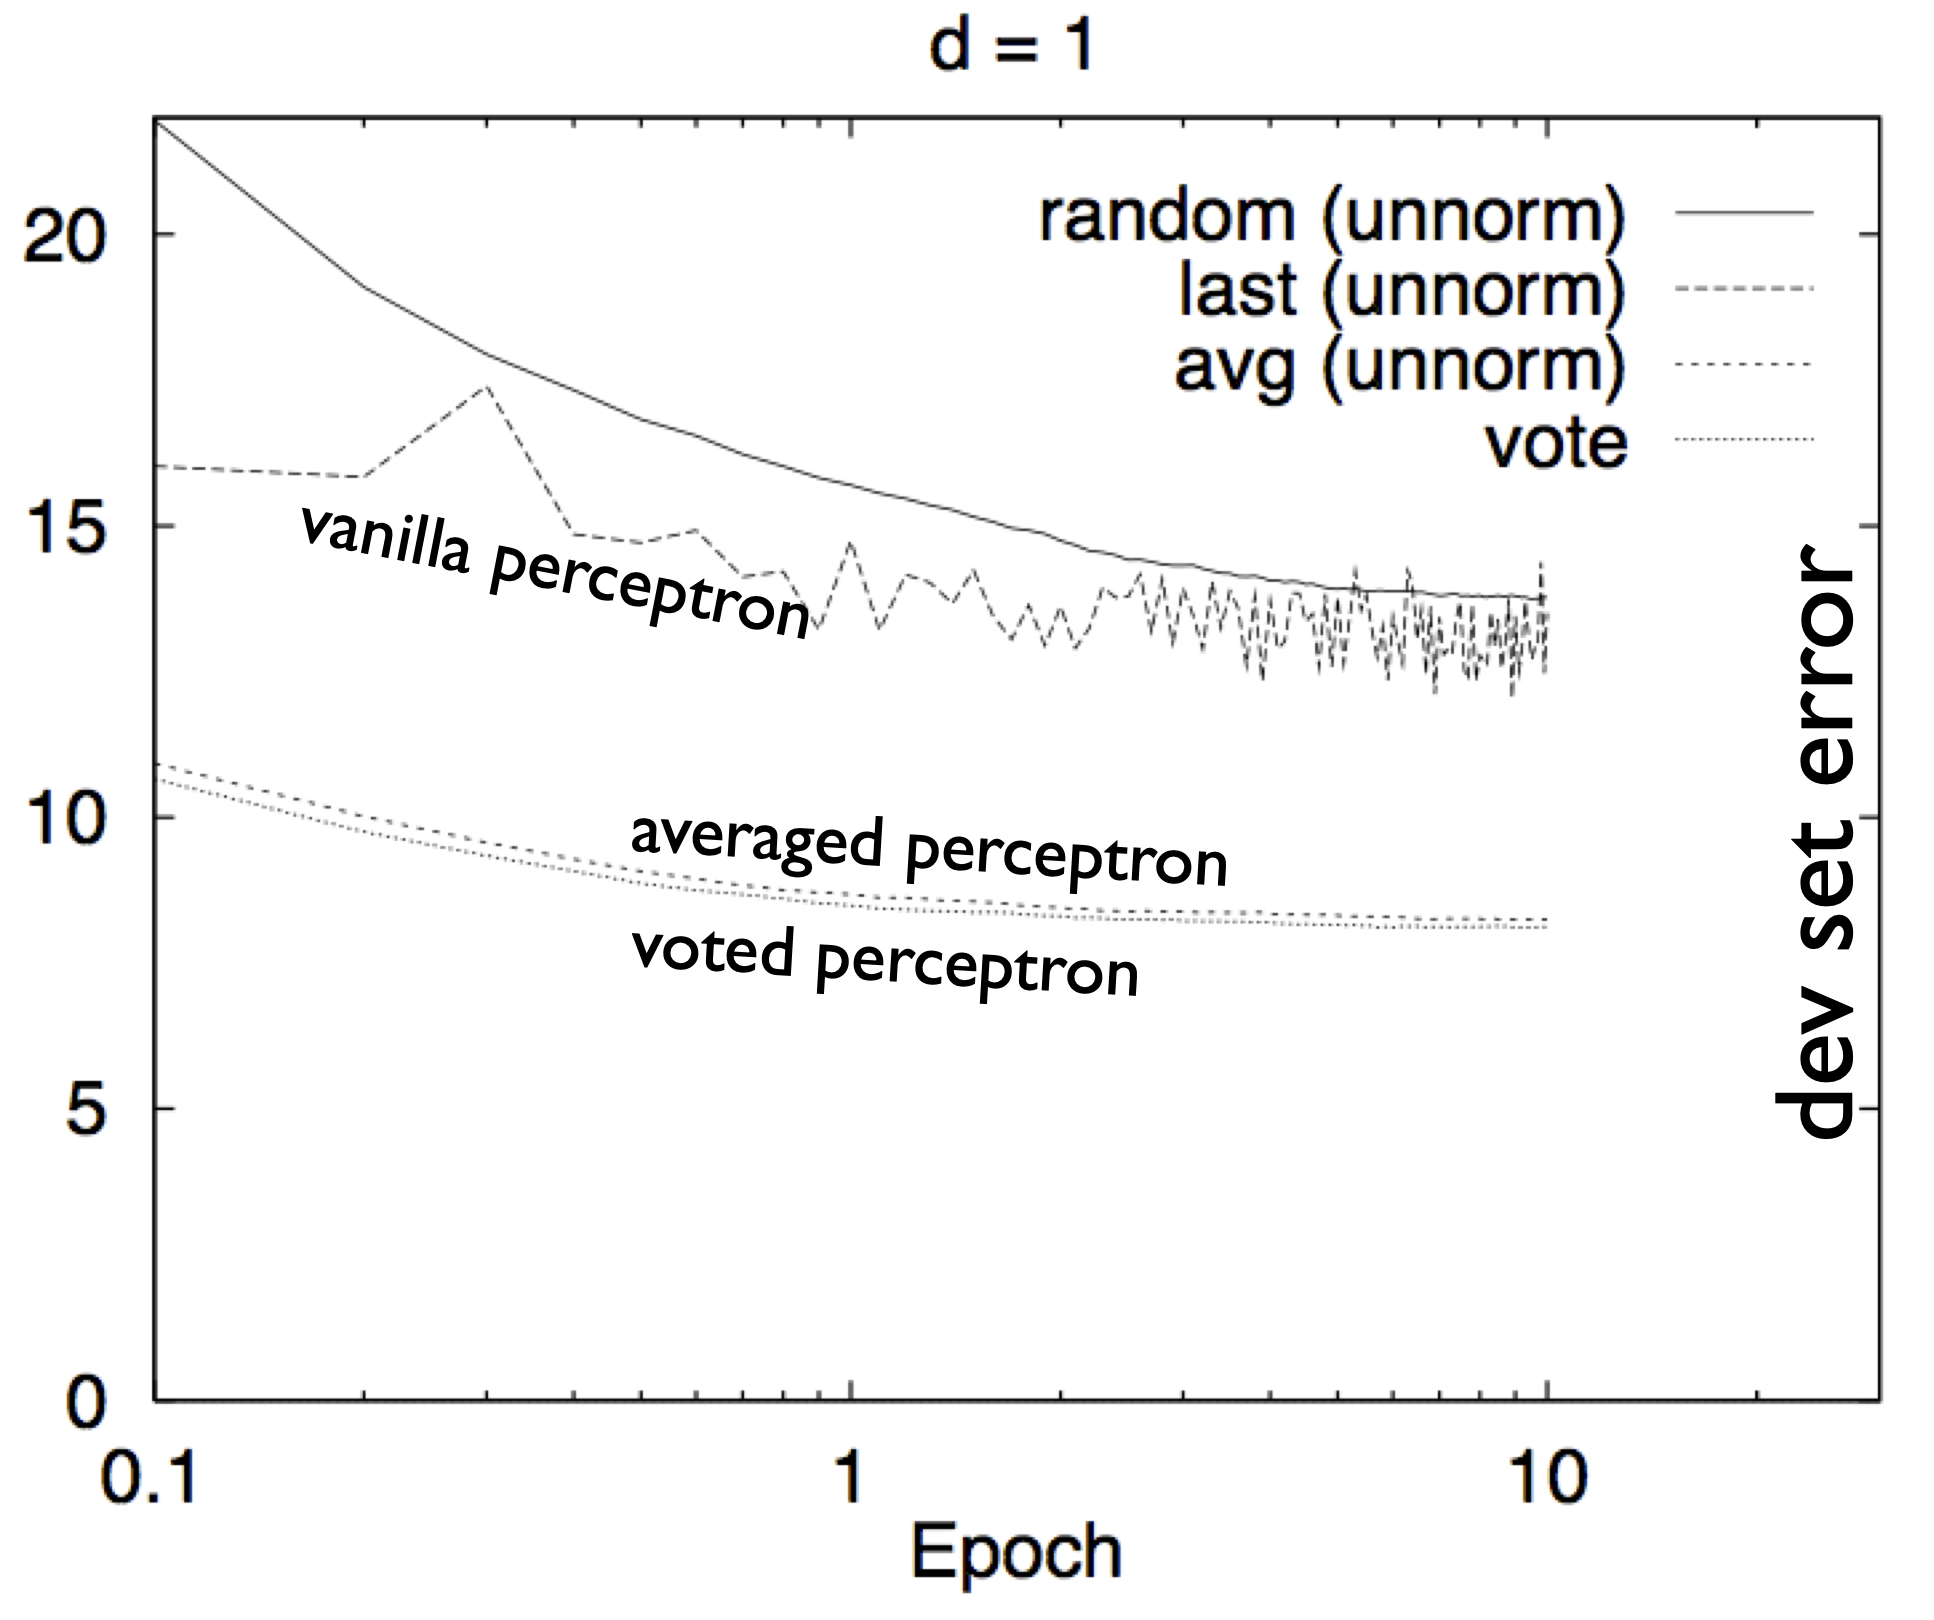 error rates of voted and averaged perceptrons, from Freund and Schapire 1999